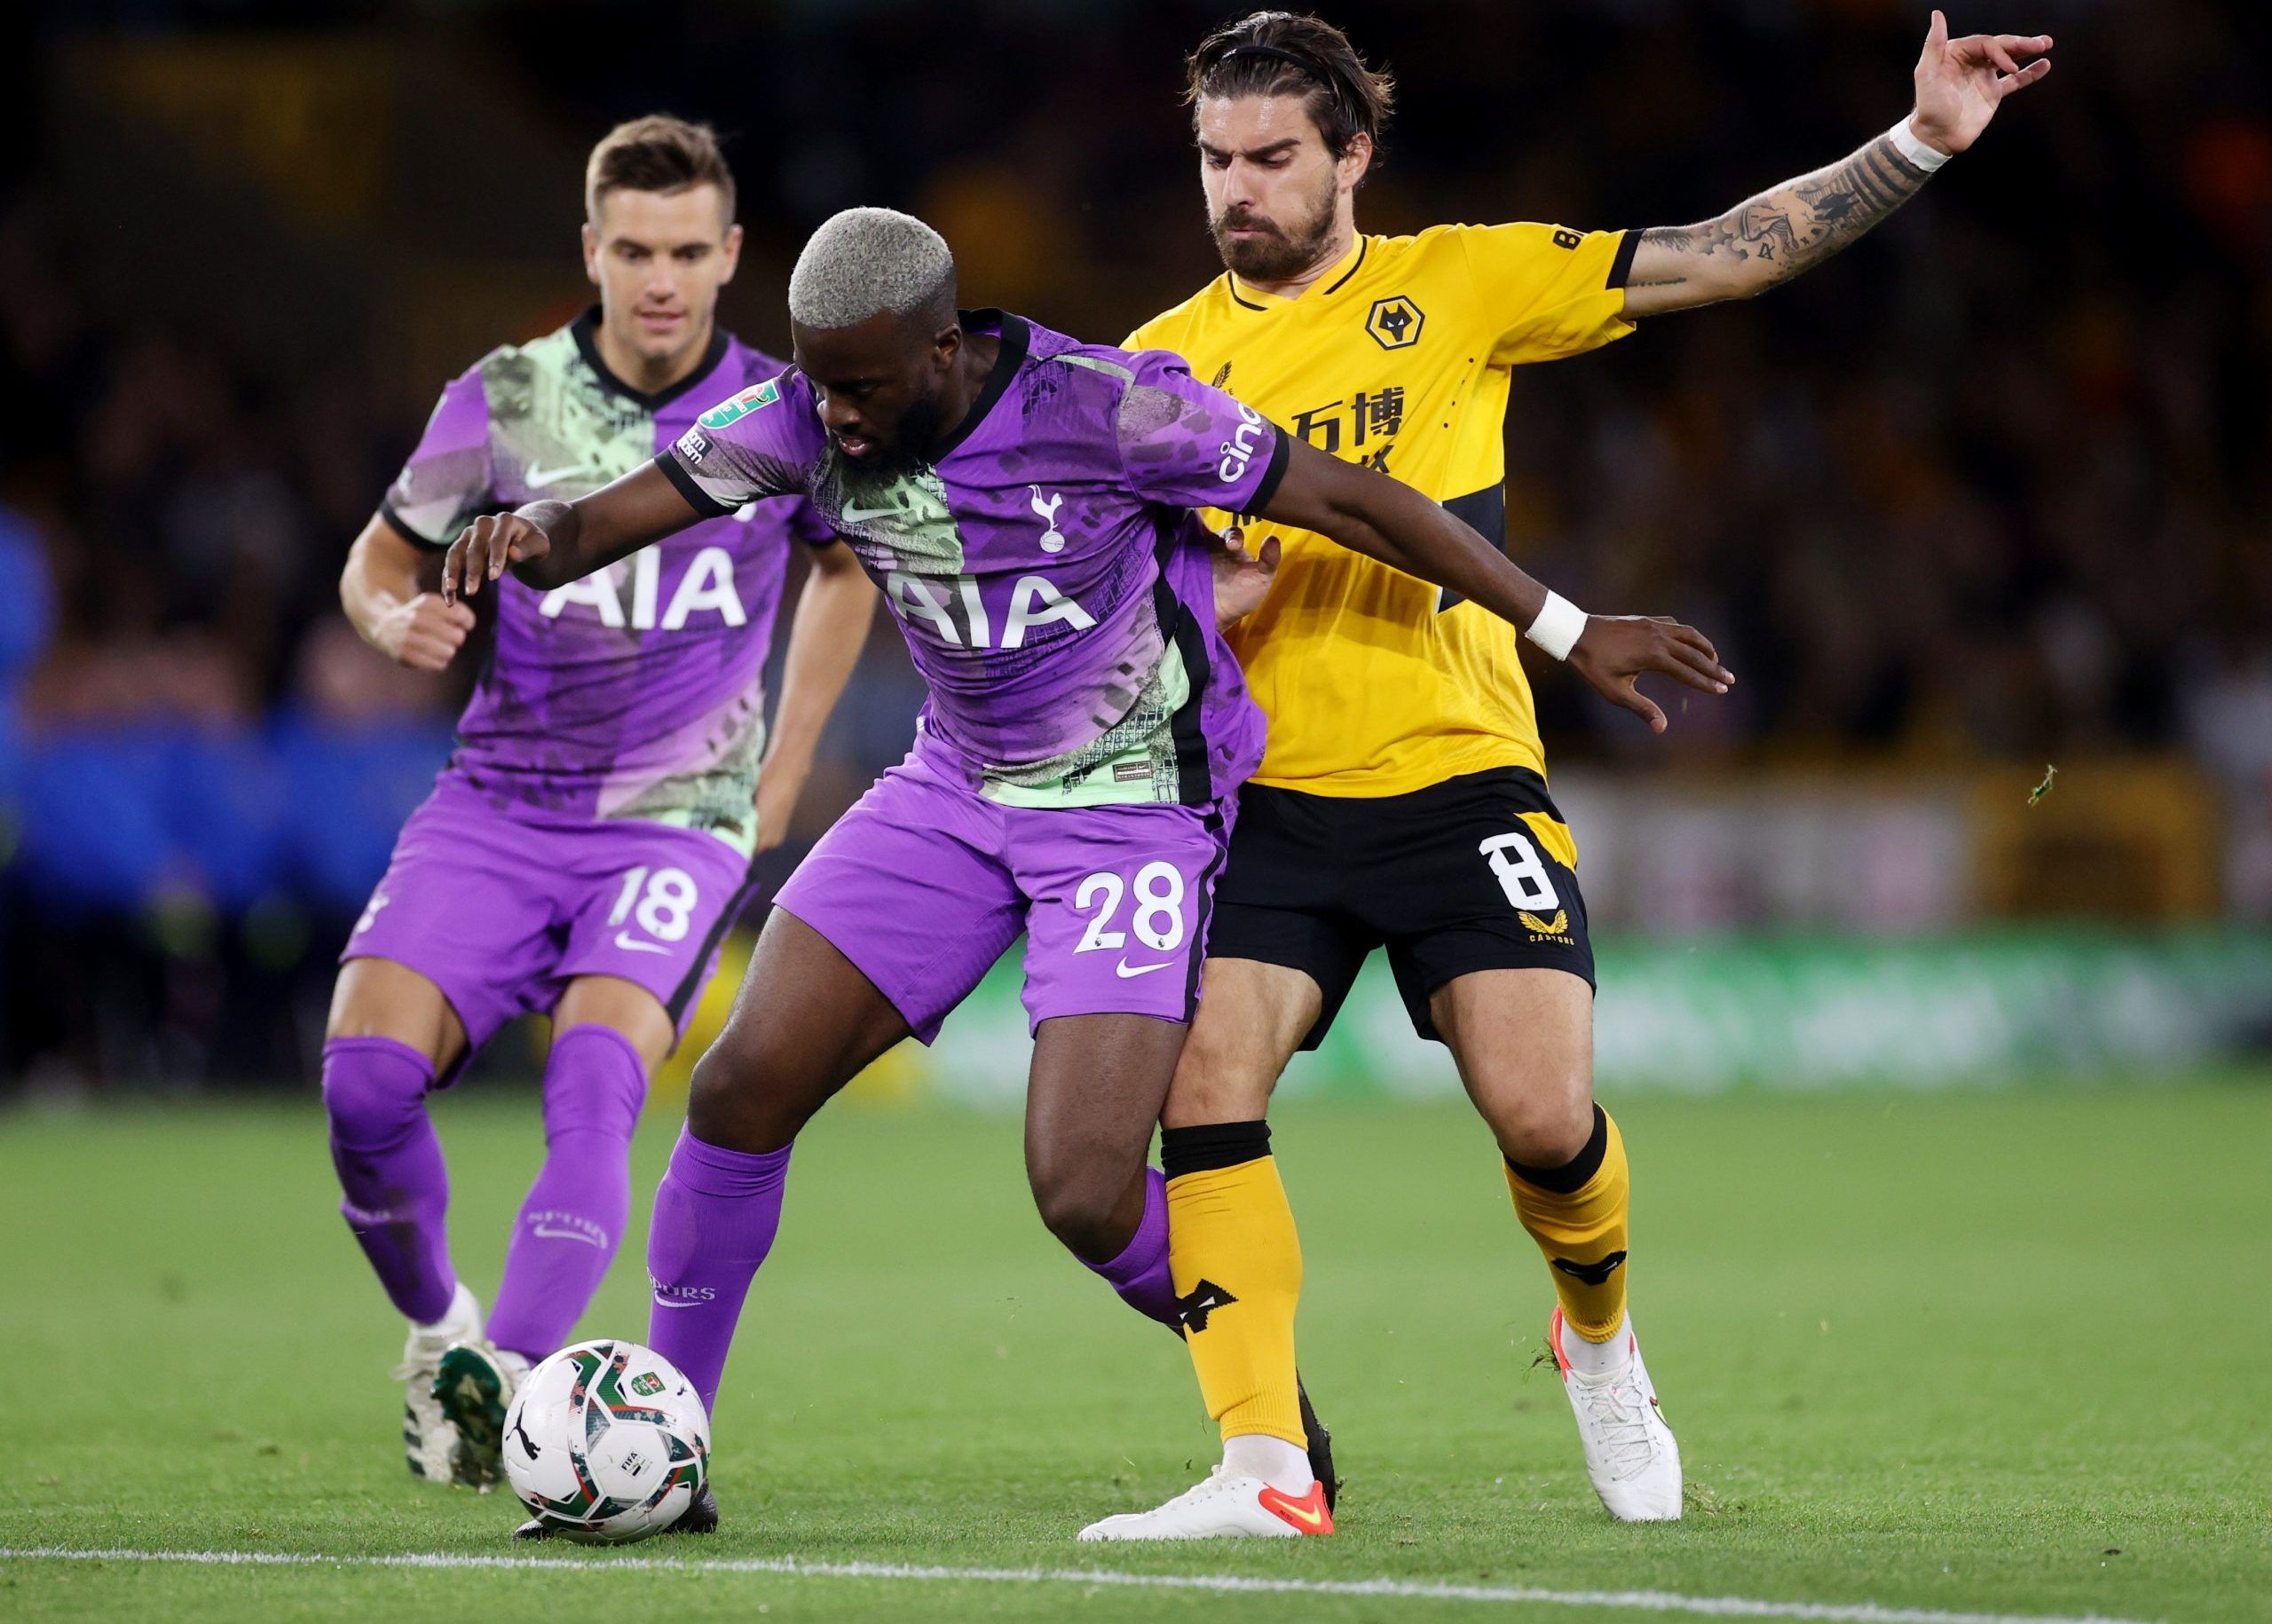 Soccer Football - Carabao Cup - Third Round - Wolverhampton Wanderers v Tottenham Hotspur - Molineux Stadium, Wolverhampton, Britain - September 22, 2021 Tottenham Hotspur's Tanguy Ndombele in action with Wolverhampton Wanderers' Ruben Neves Action Images via Reuters/Carl Recine EDITORIAL USE ONLY. No use with unauthorized audio, video, data, fixture lists, club/league logos or 'live' services. Online in-match use limited to 75 images, no video emulation. No use in betting, games or single club 